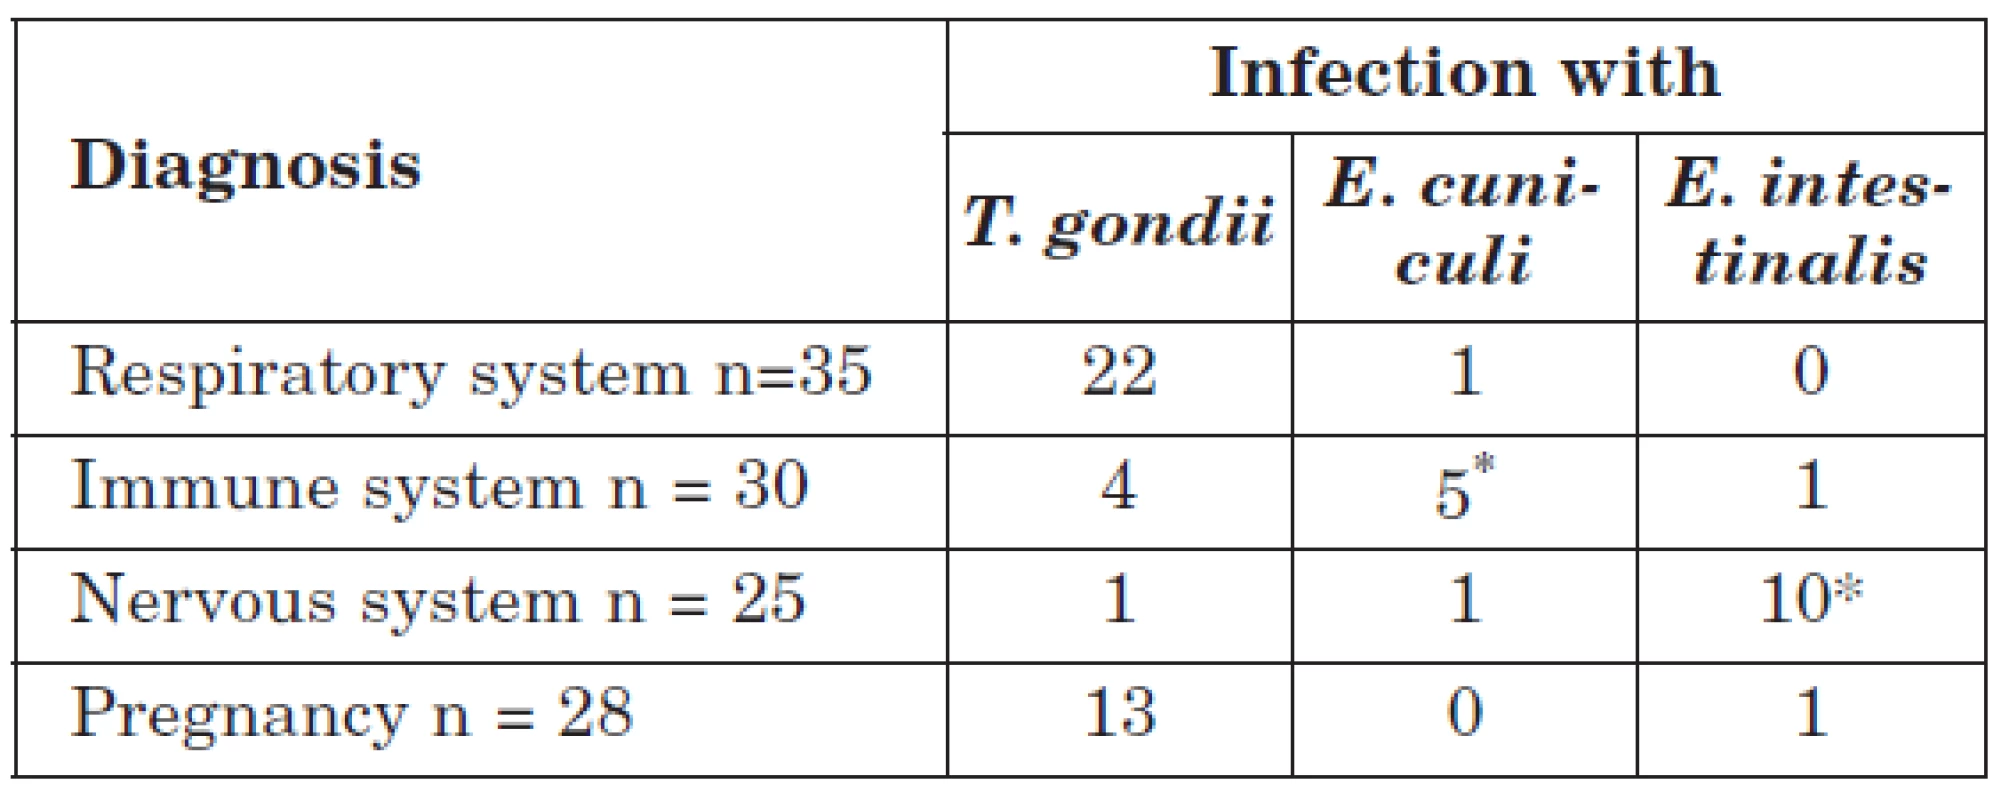 The relationship between the occurrence of individual infection and clinical diagnoses of examined women